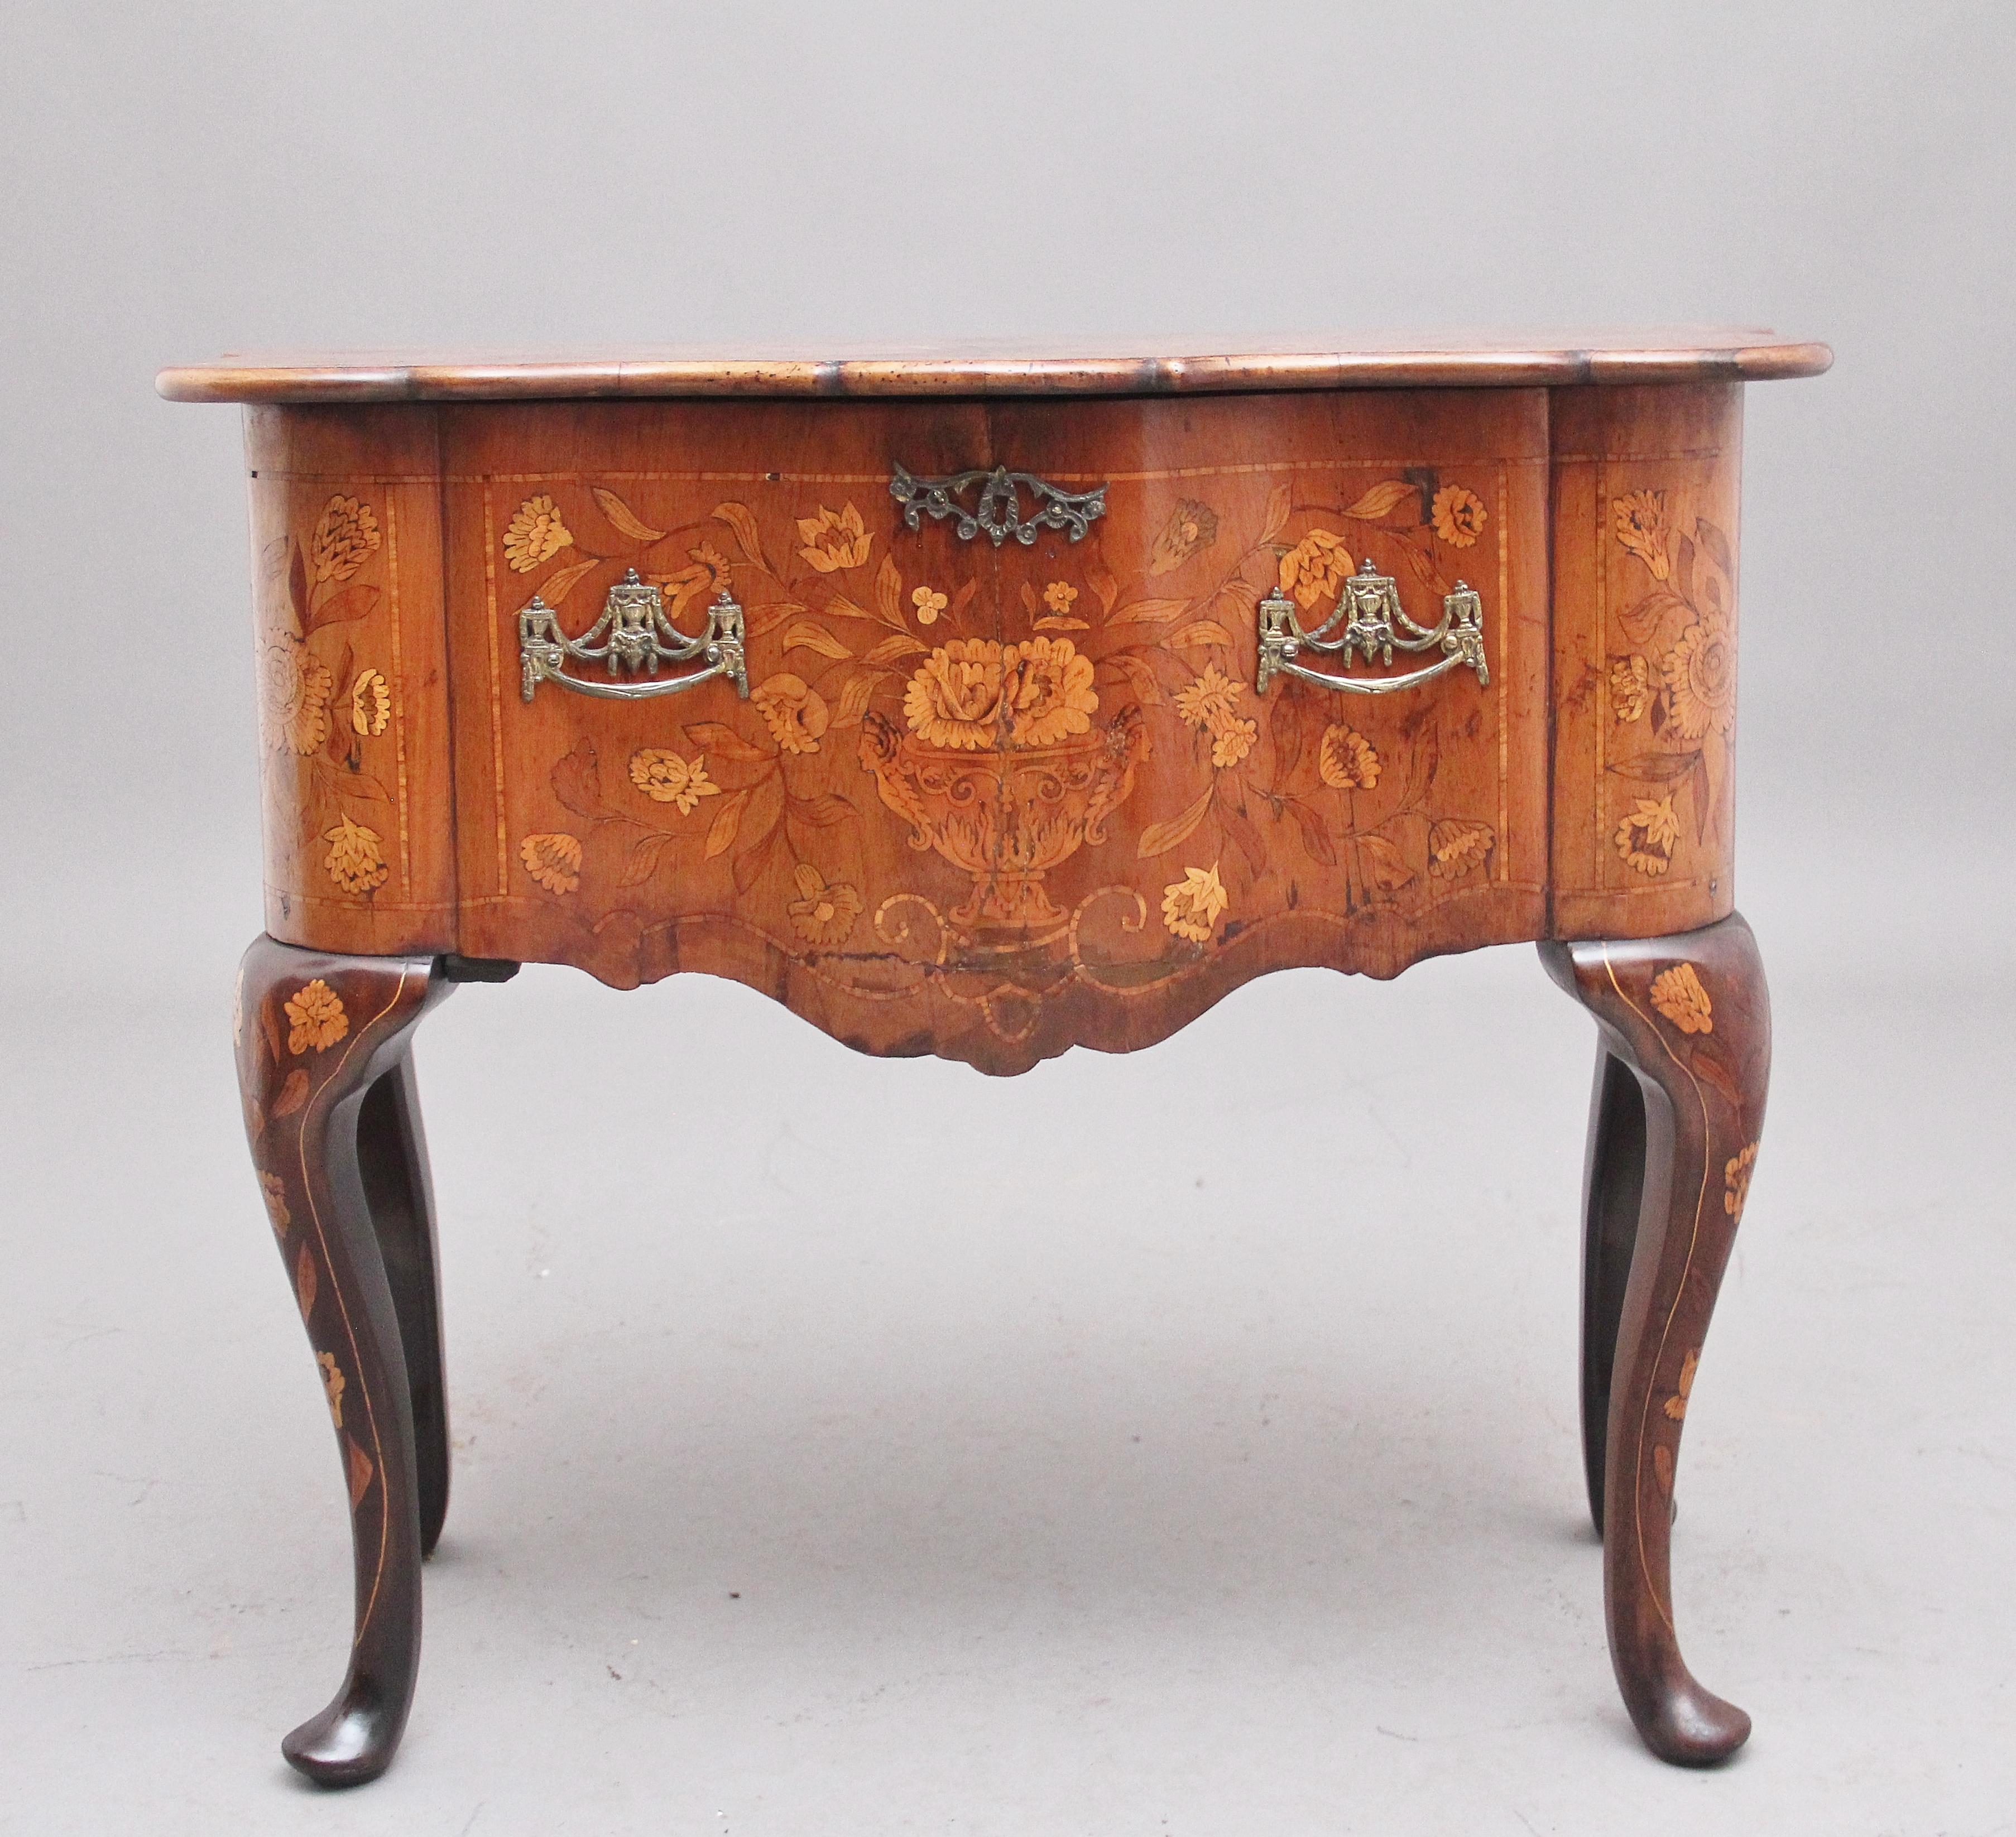 A lovely quality 18th century Dutch marquetry walnut side table, profusely inlaid all over with decorative floral marquetry inlay, the shaped hinged top opening up and flipping over and resting on the rear leg which folds round, opening to reveal